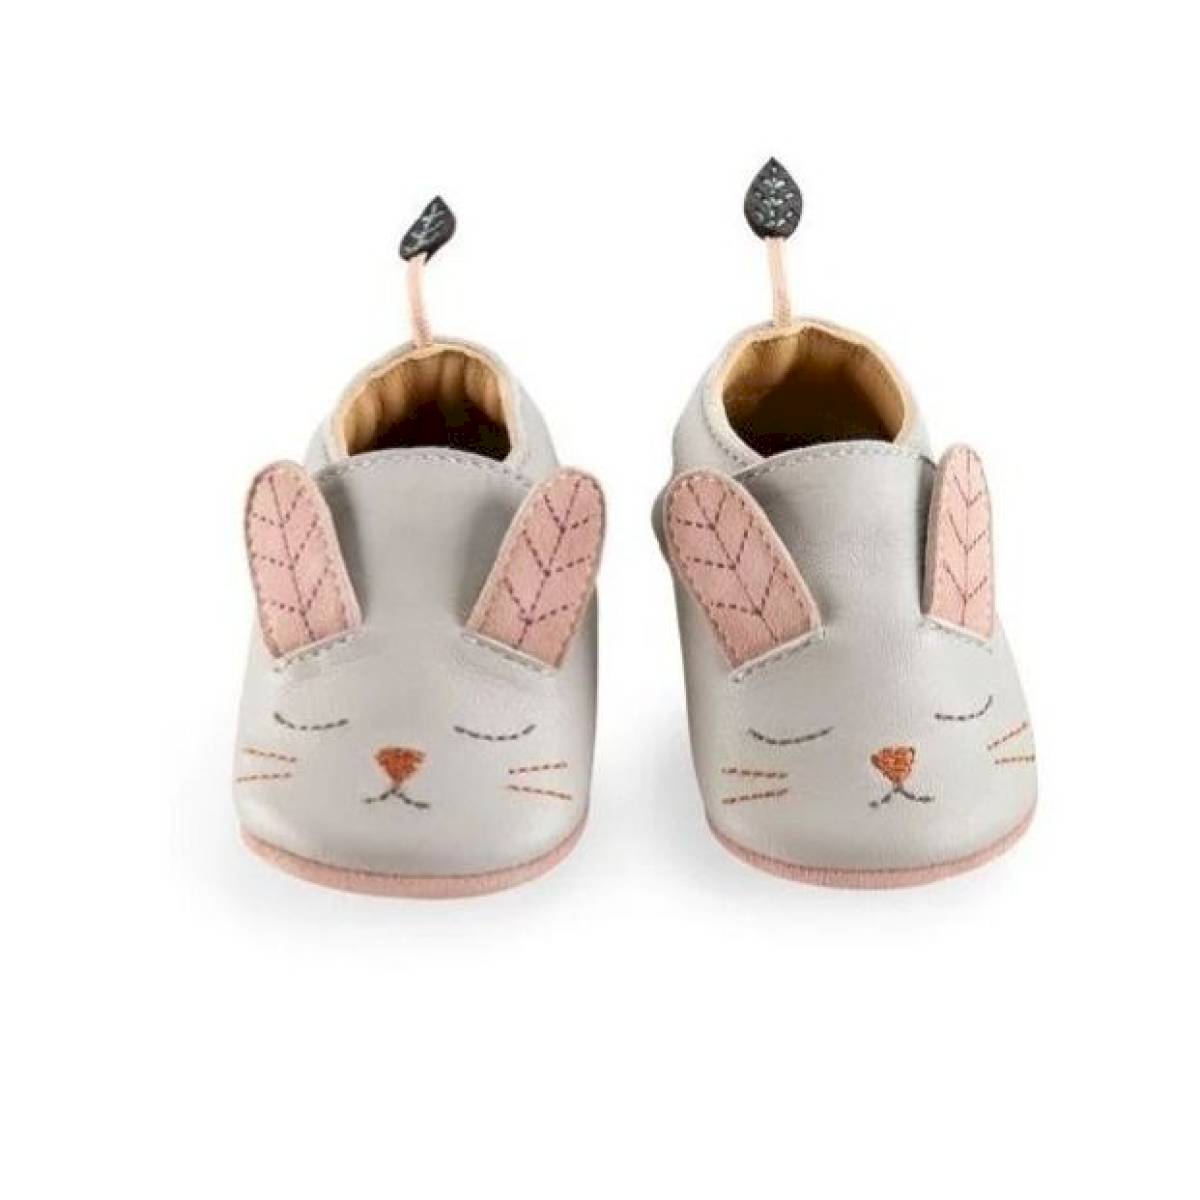 Chaussons Cuir Lapin Gris 0/6 m